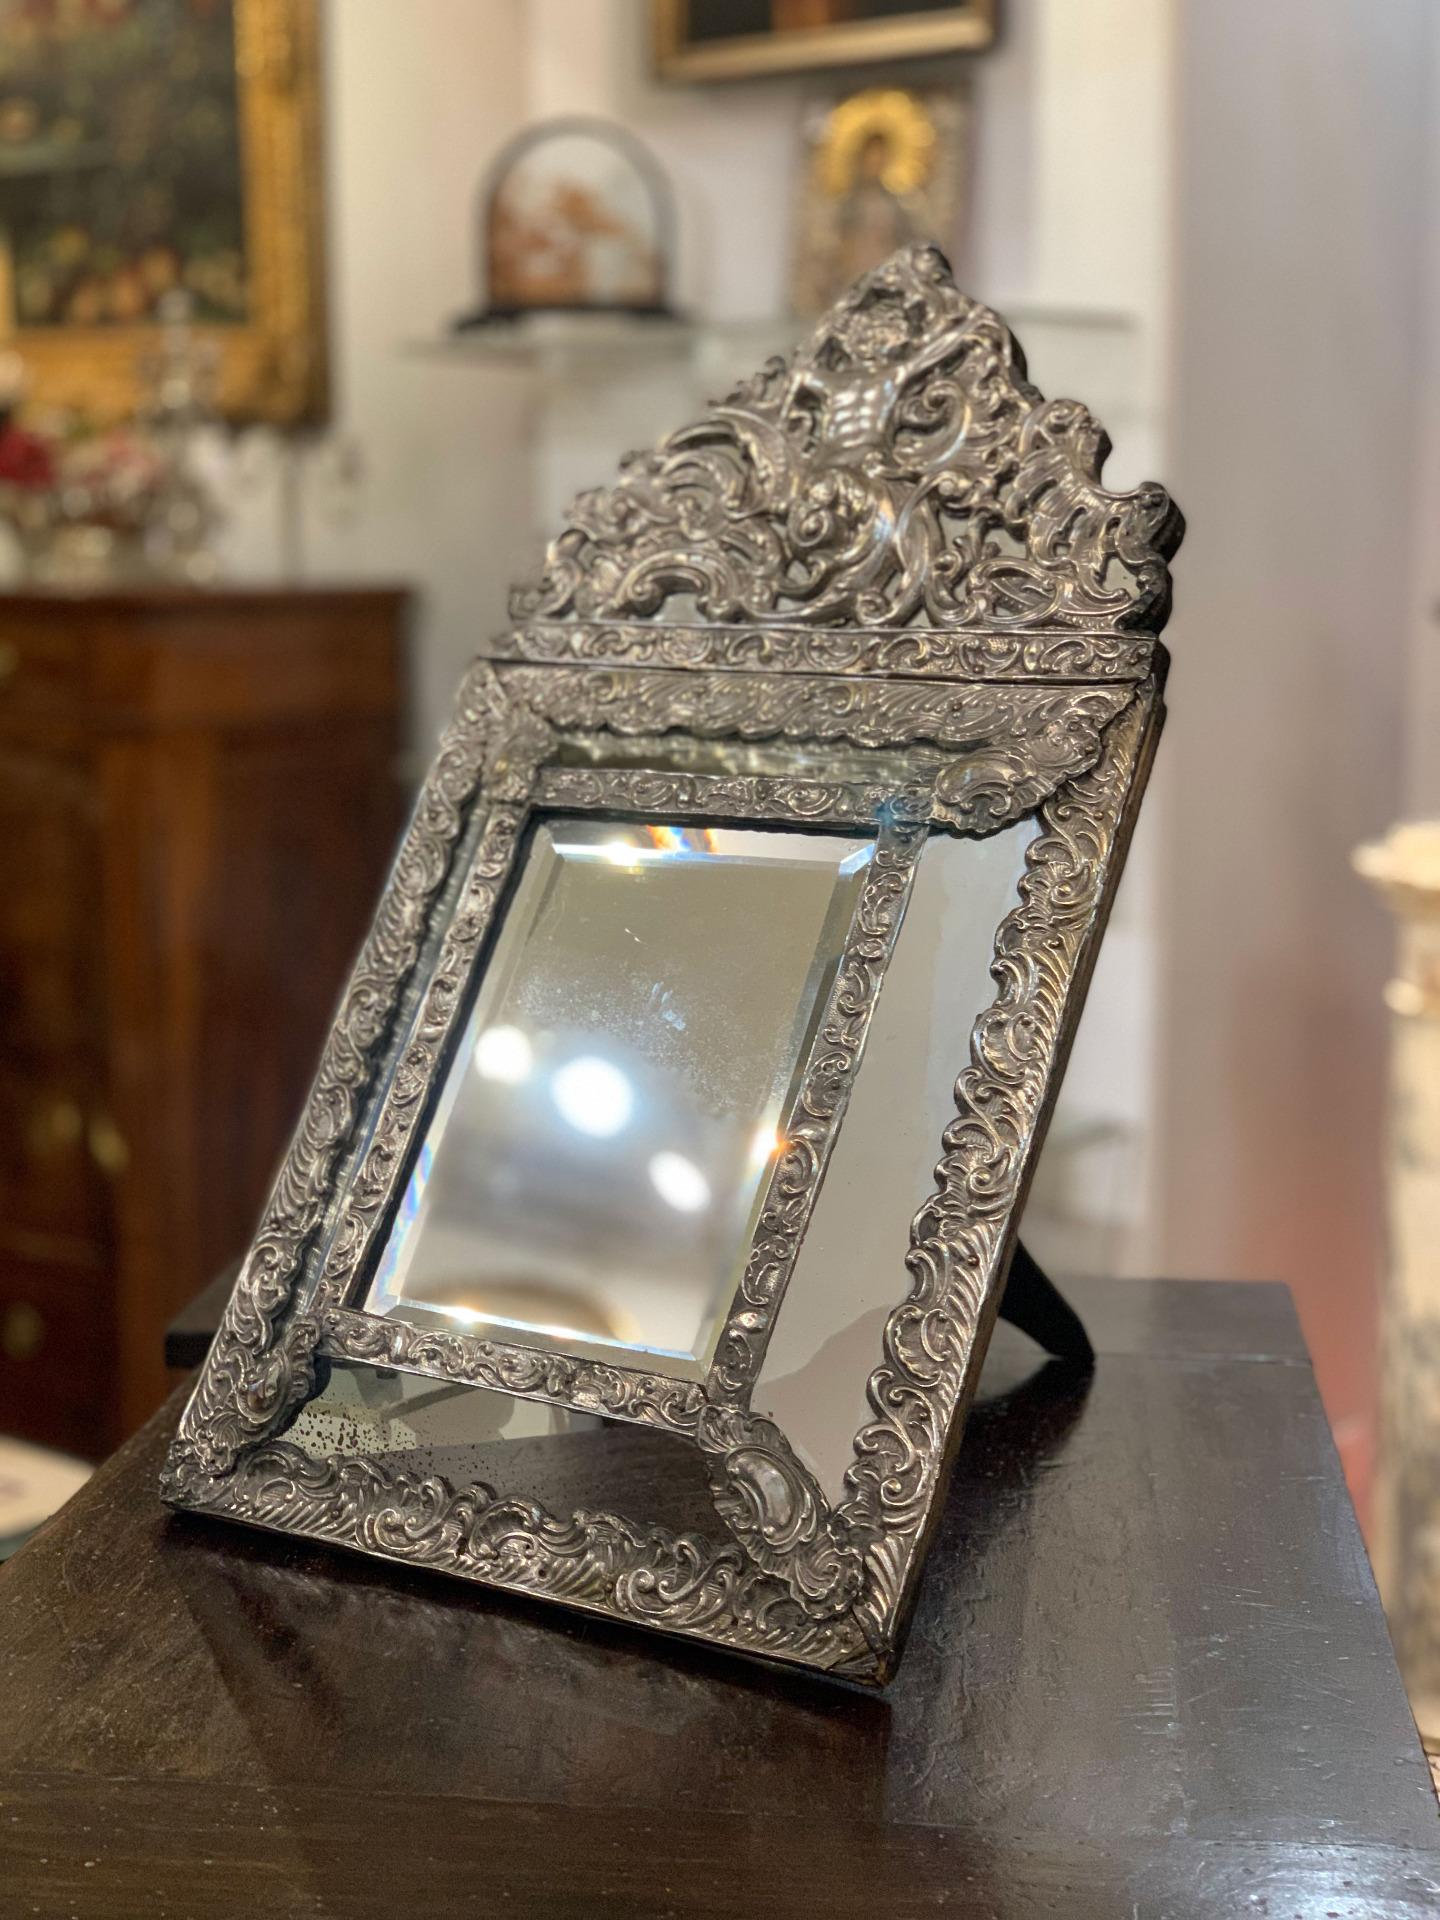 Elegant toilette table mirror in Renaissance style, in hand-crafted brass with floral decorations with the image of Cupid centrally. The mirror, which has a folding and disappearing pedestal, can also be placed on the wall, since its pedestal does